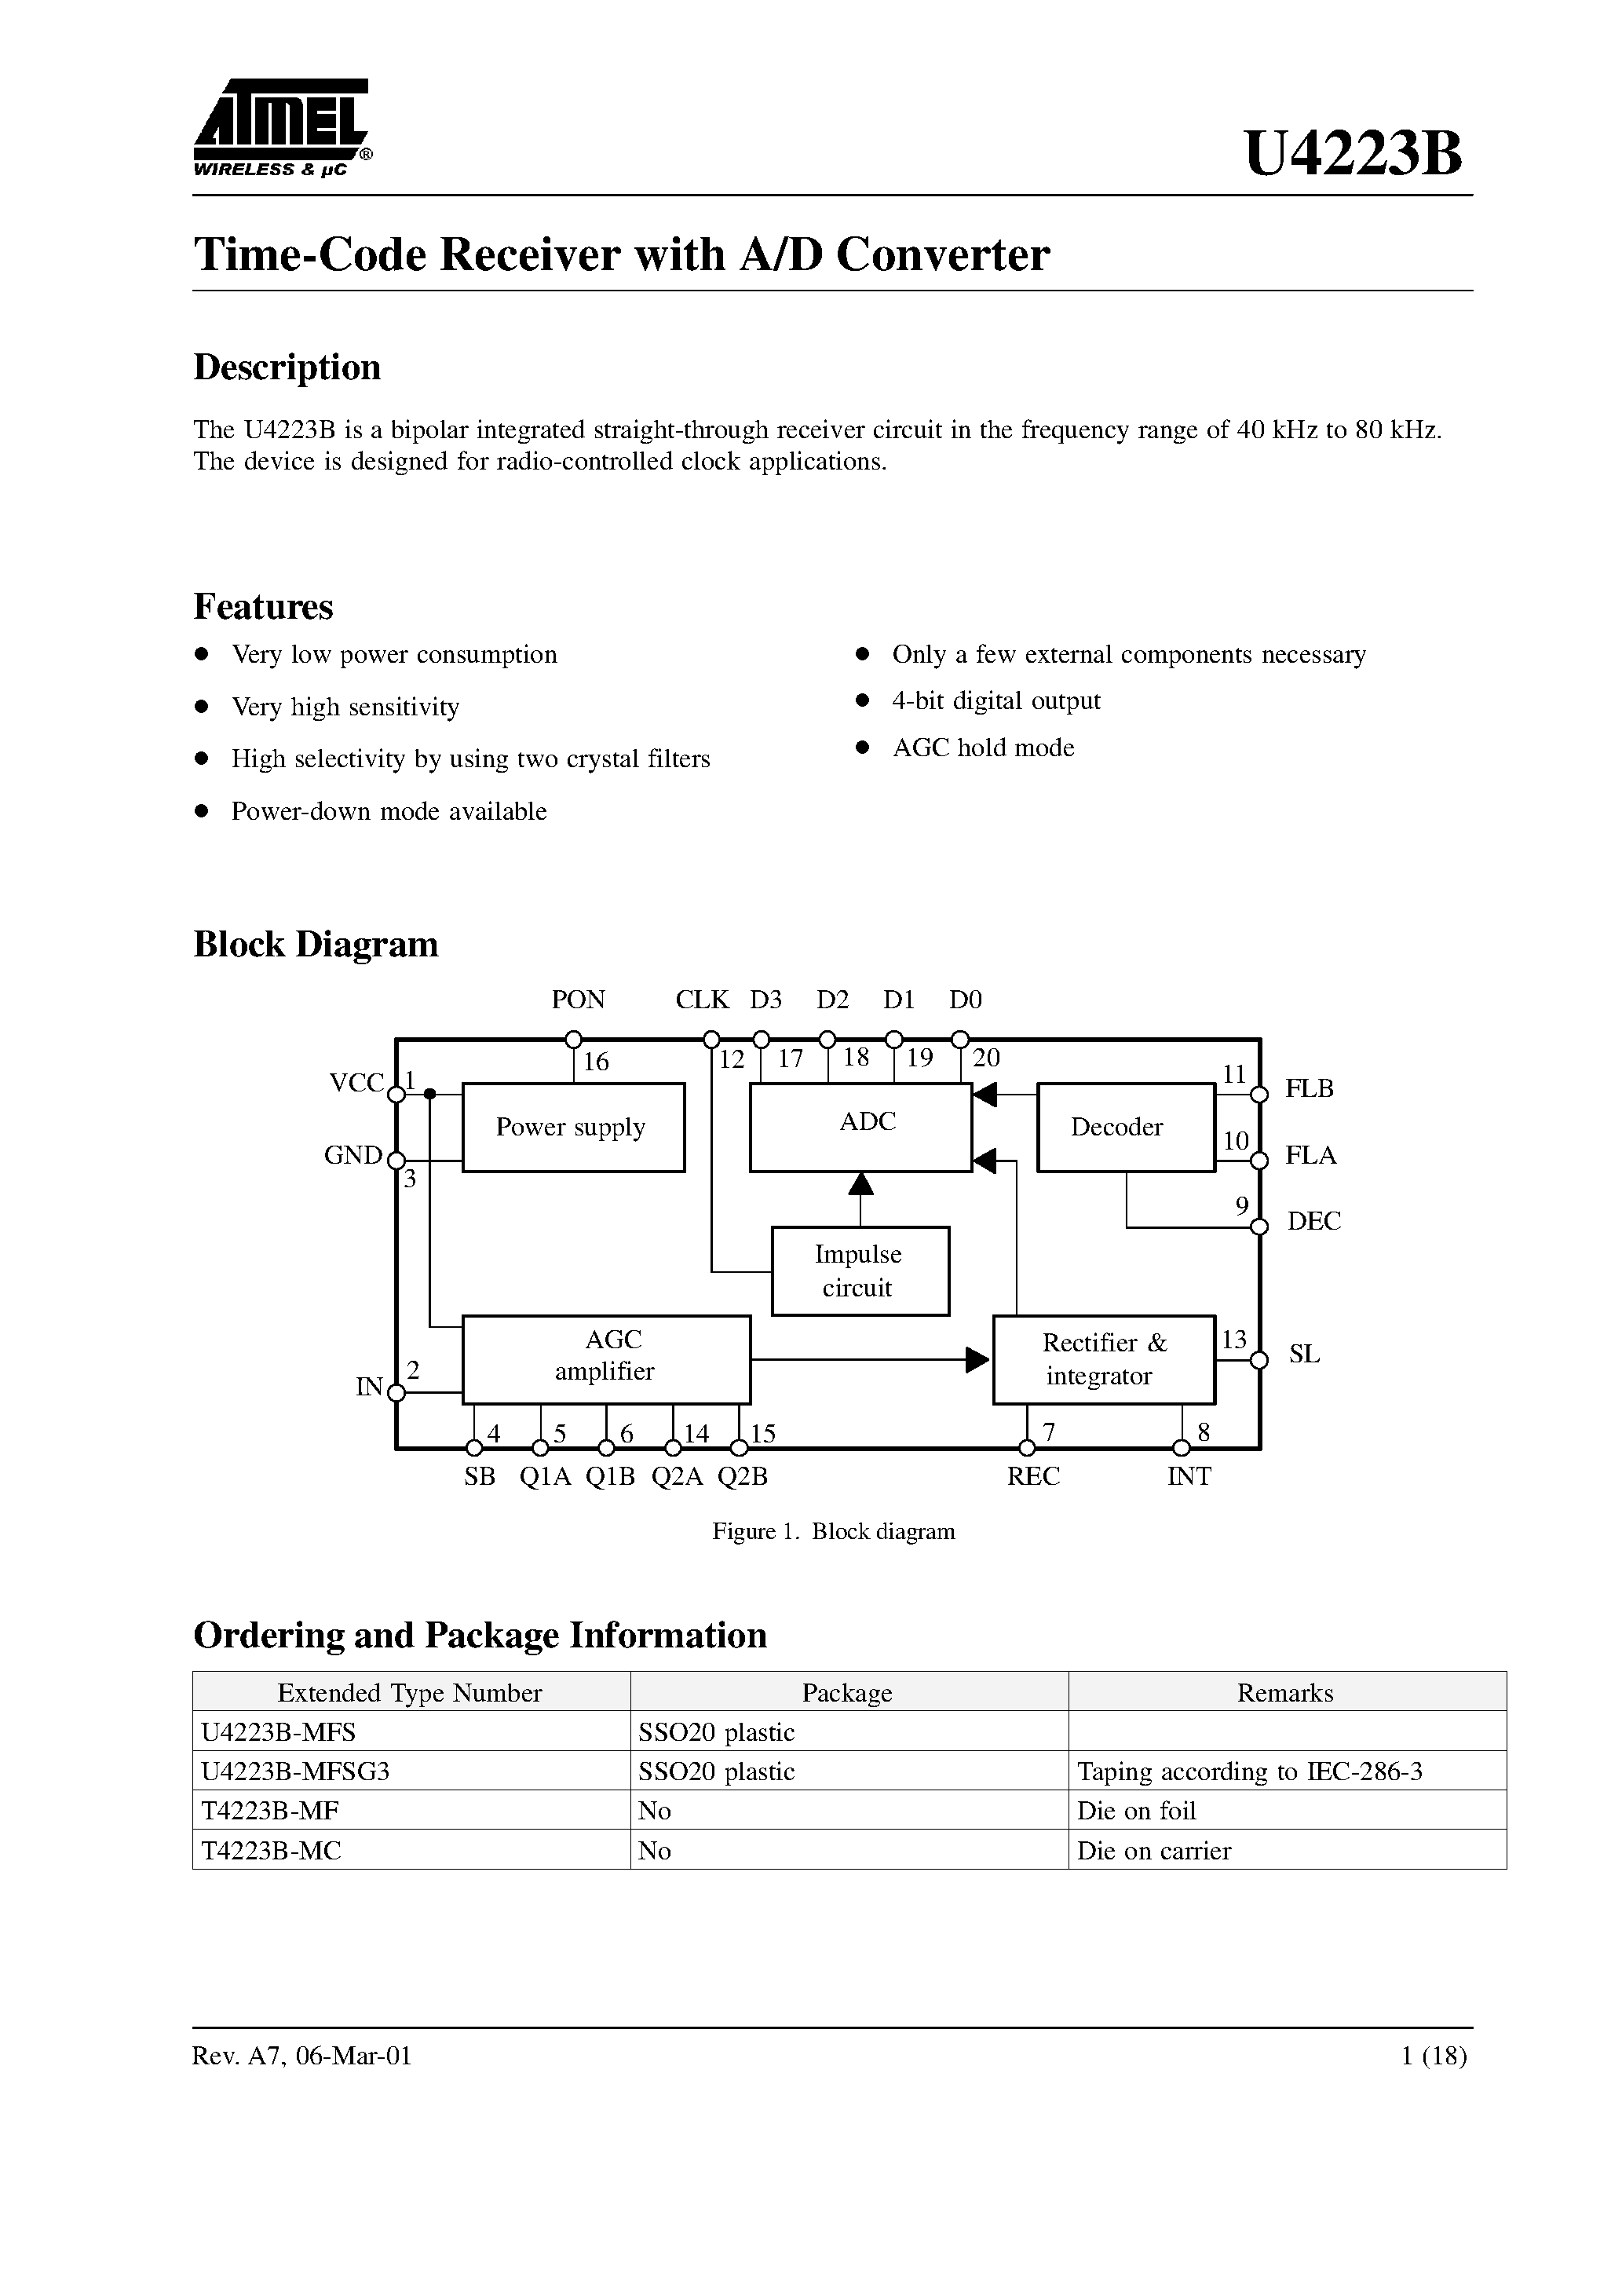 Datasheet U4223B-MFSG3 - Time-Code Receiver with A/D Converter page 1